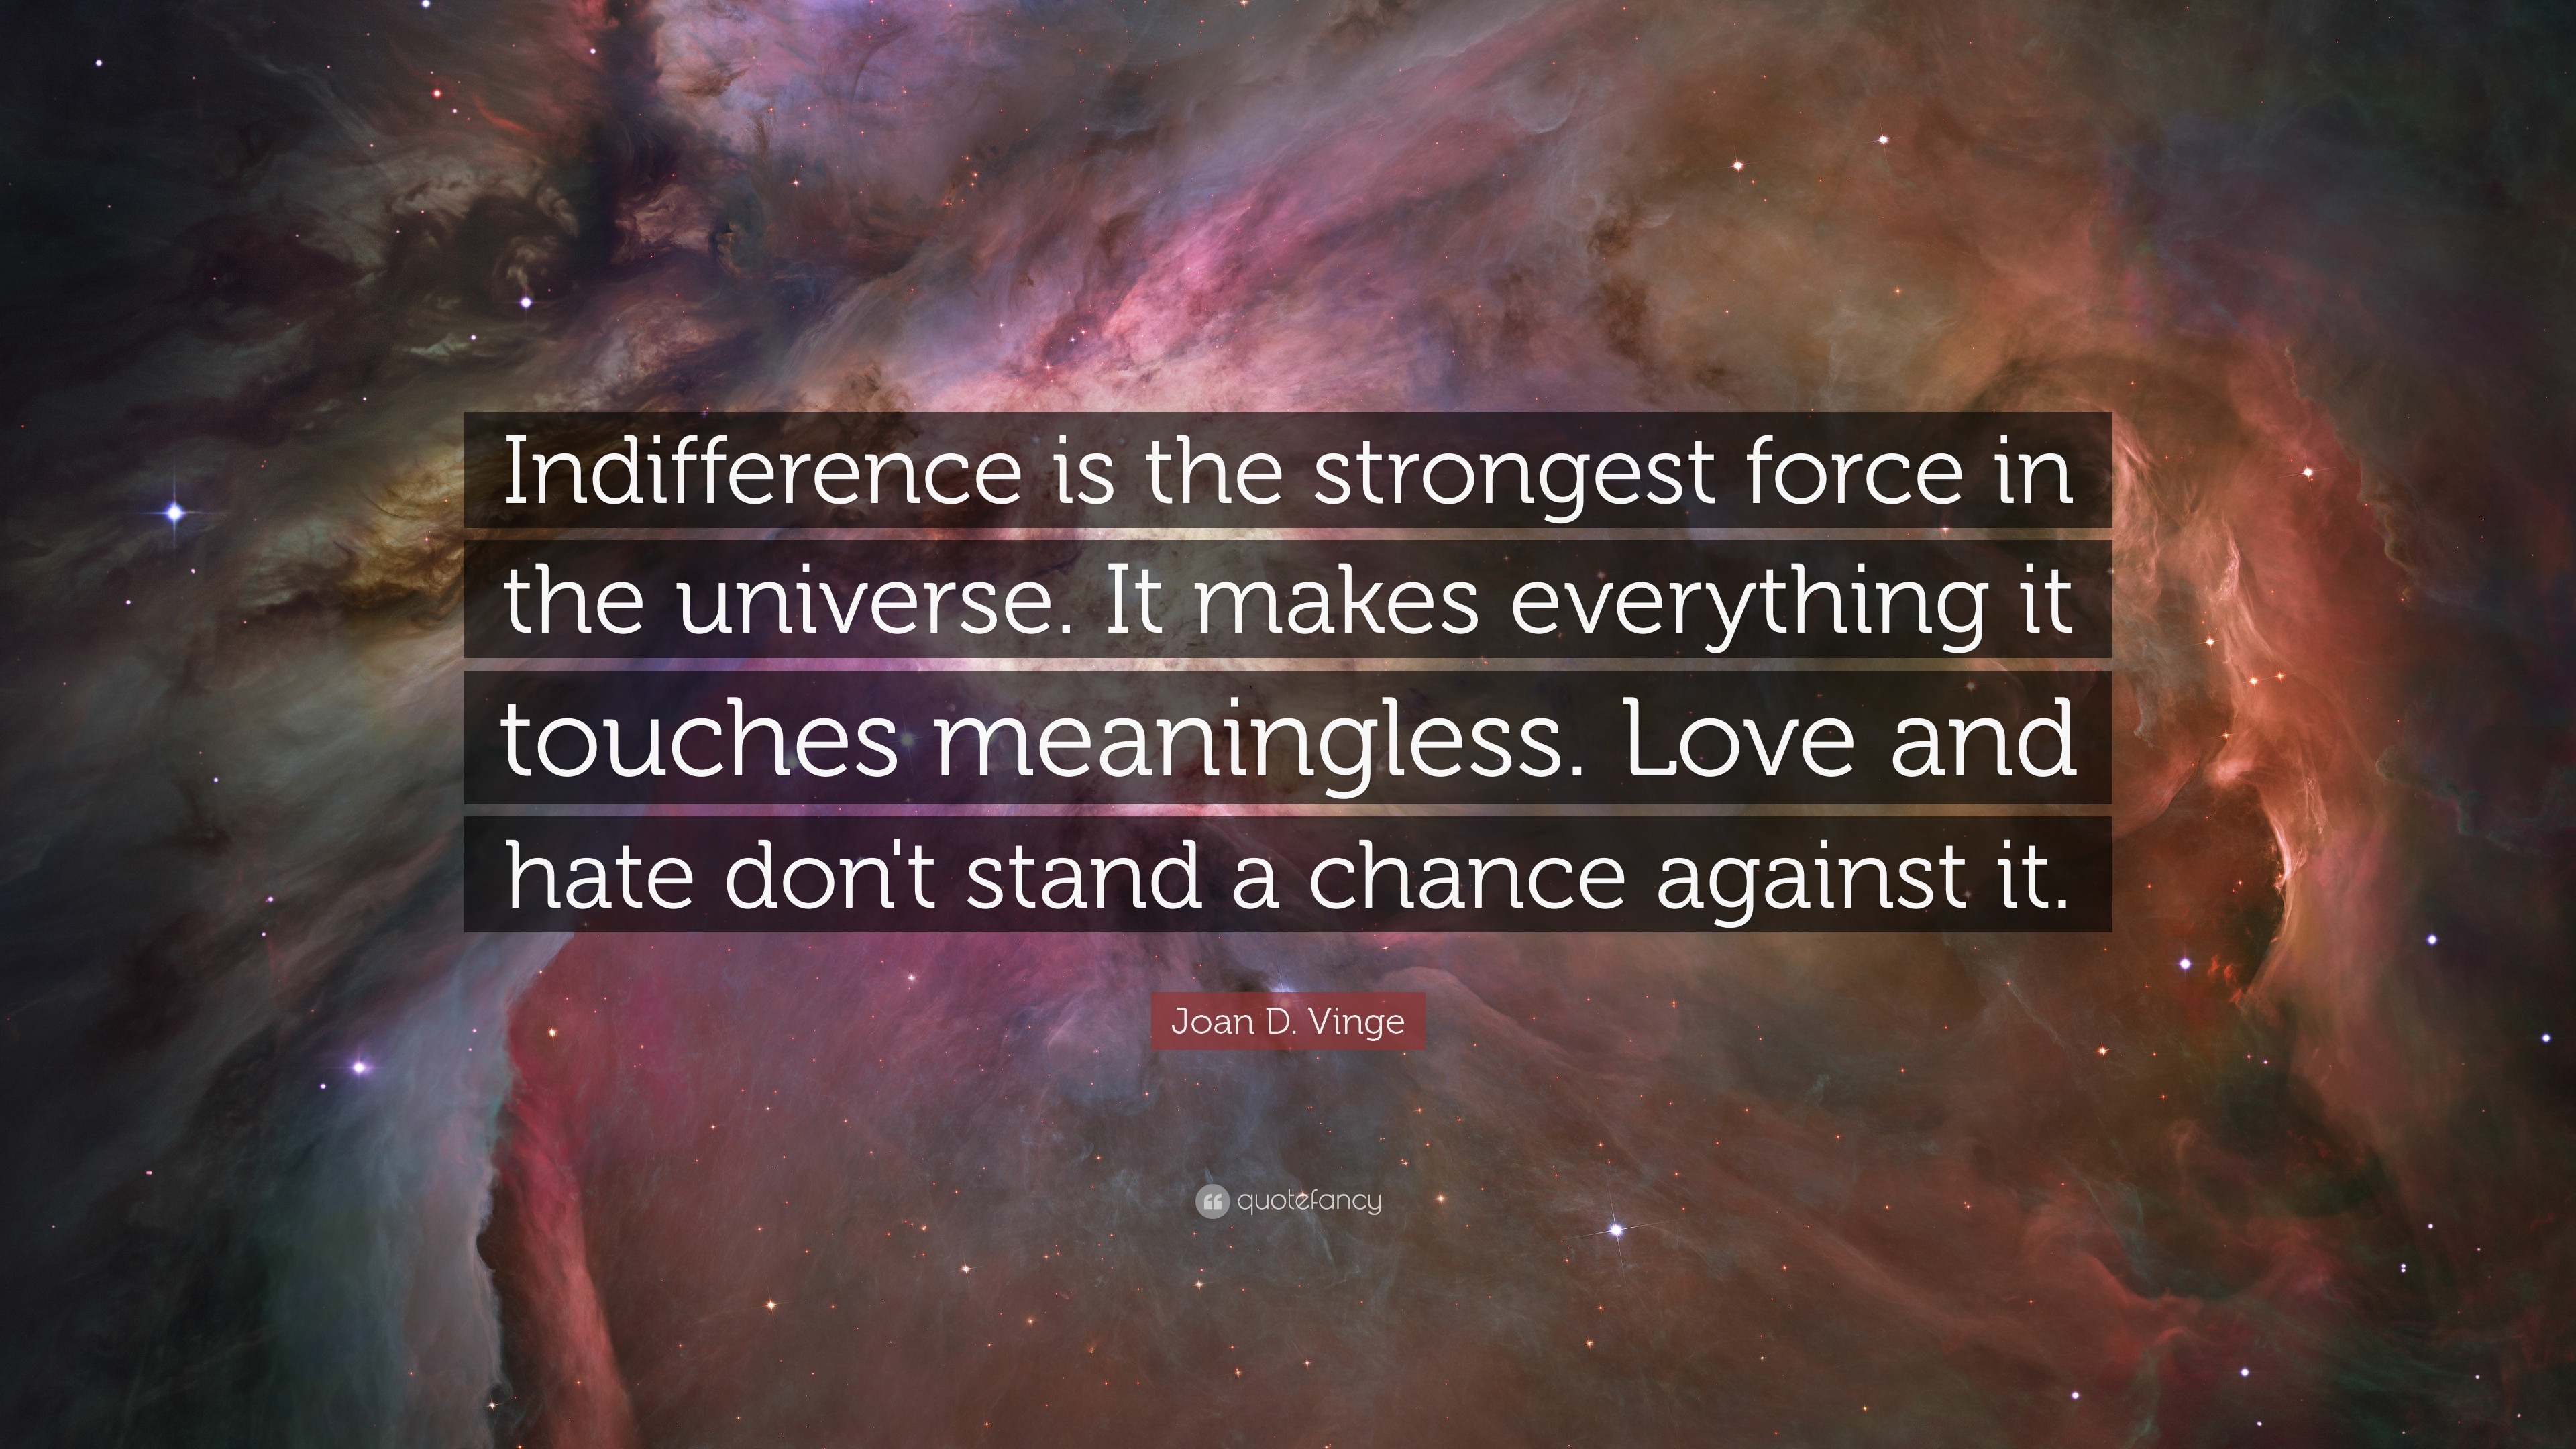 Hate Quotes “Indifference is the strongest force in the universe It makes everything